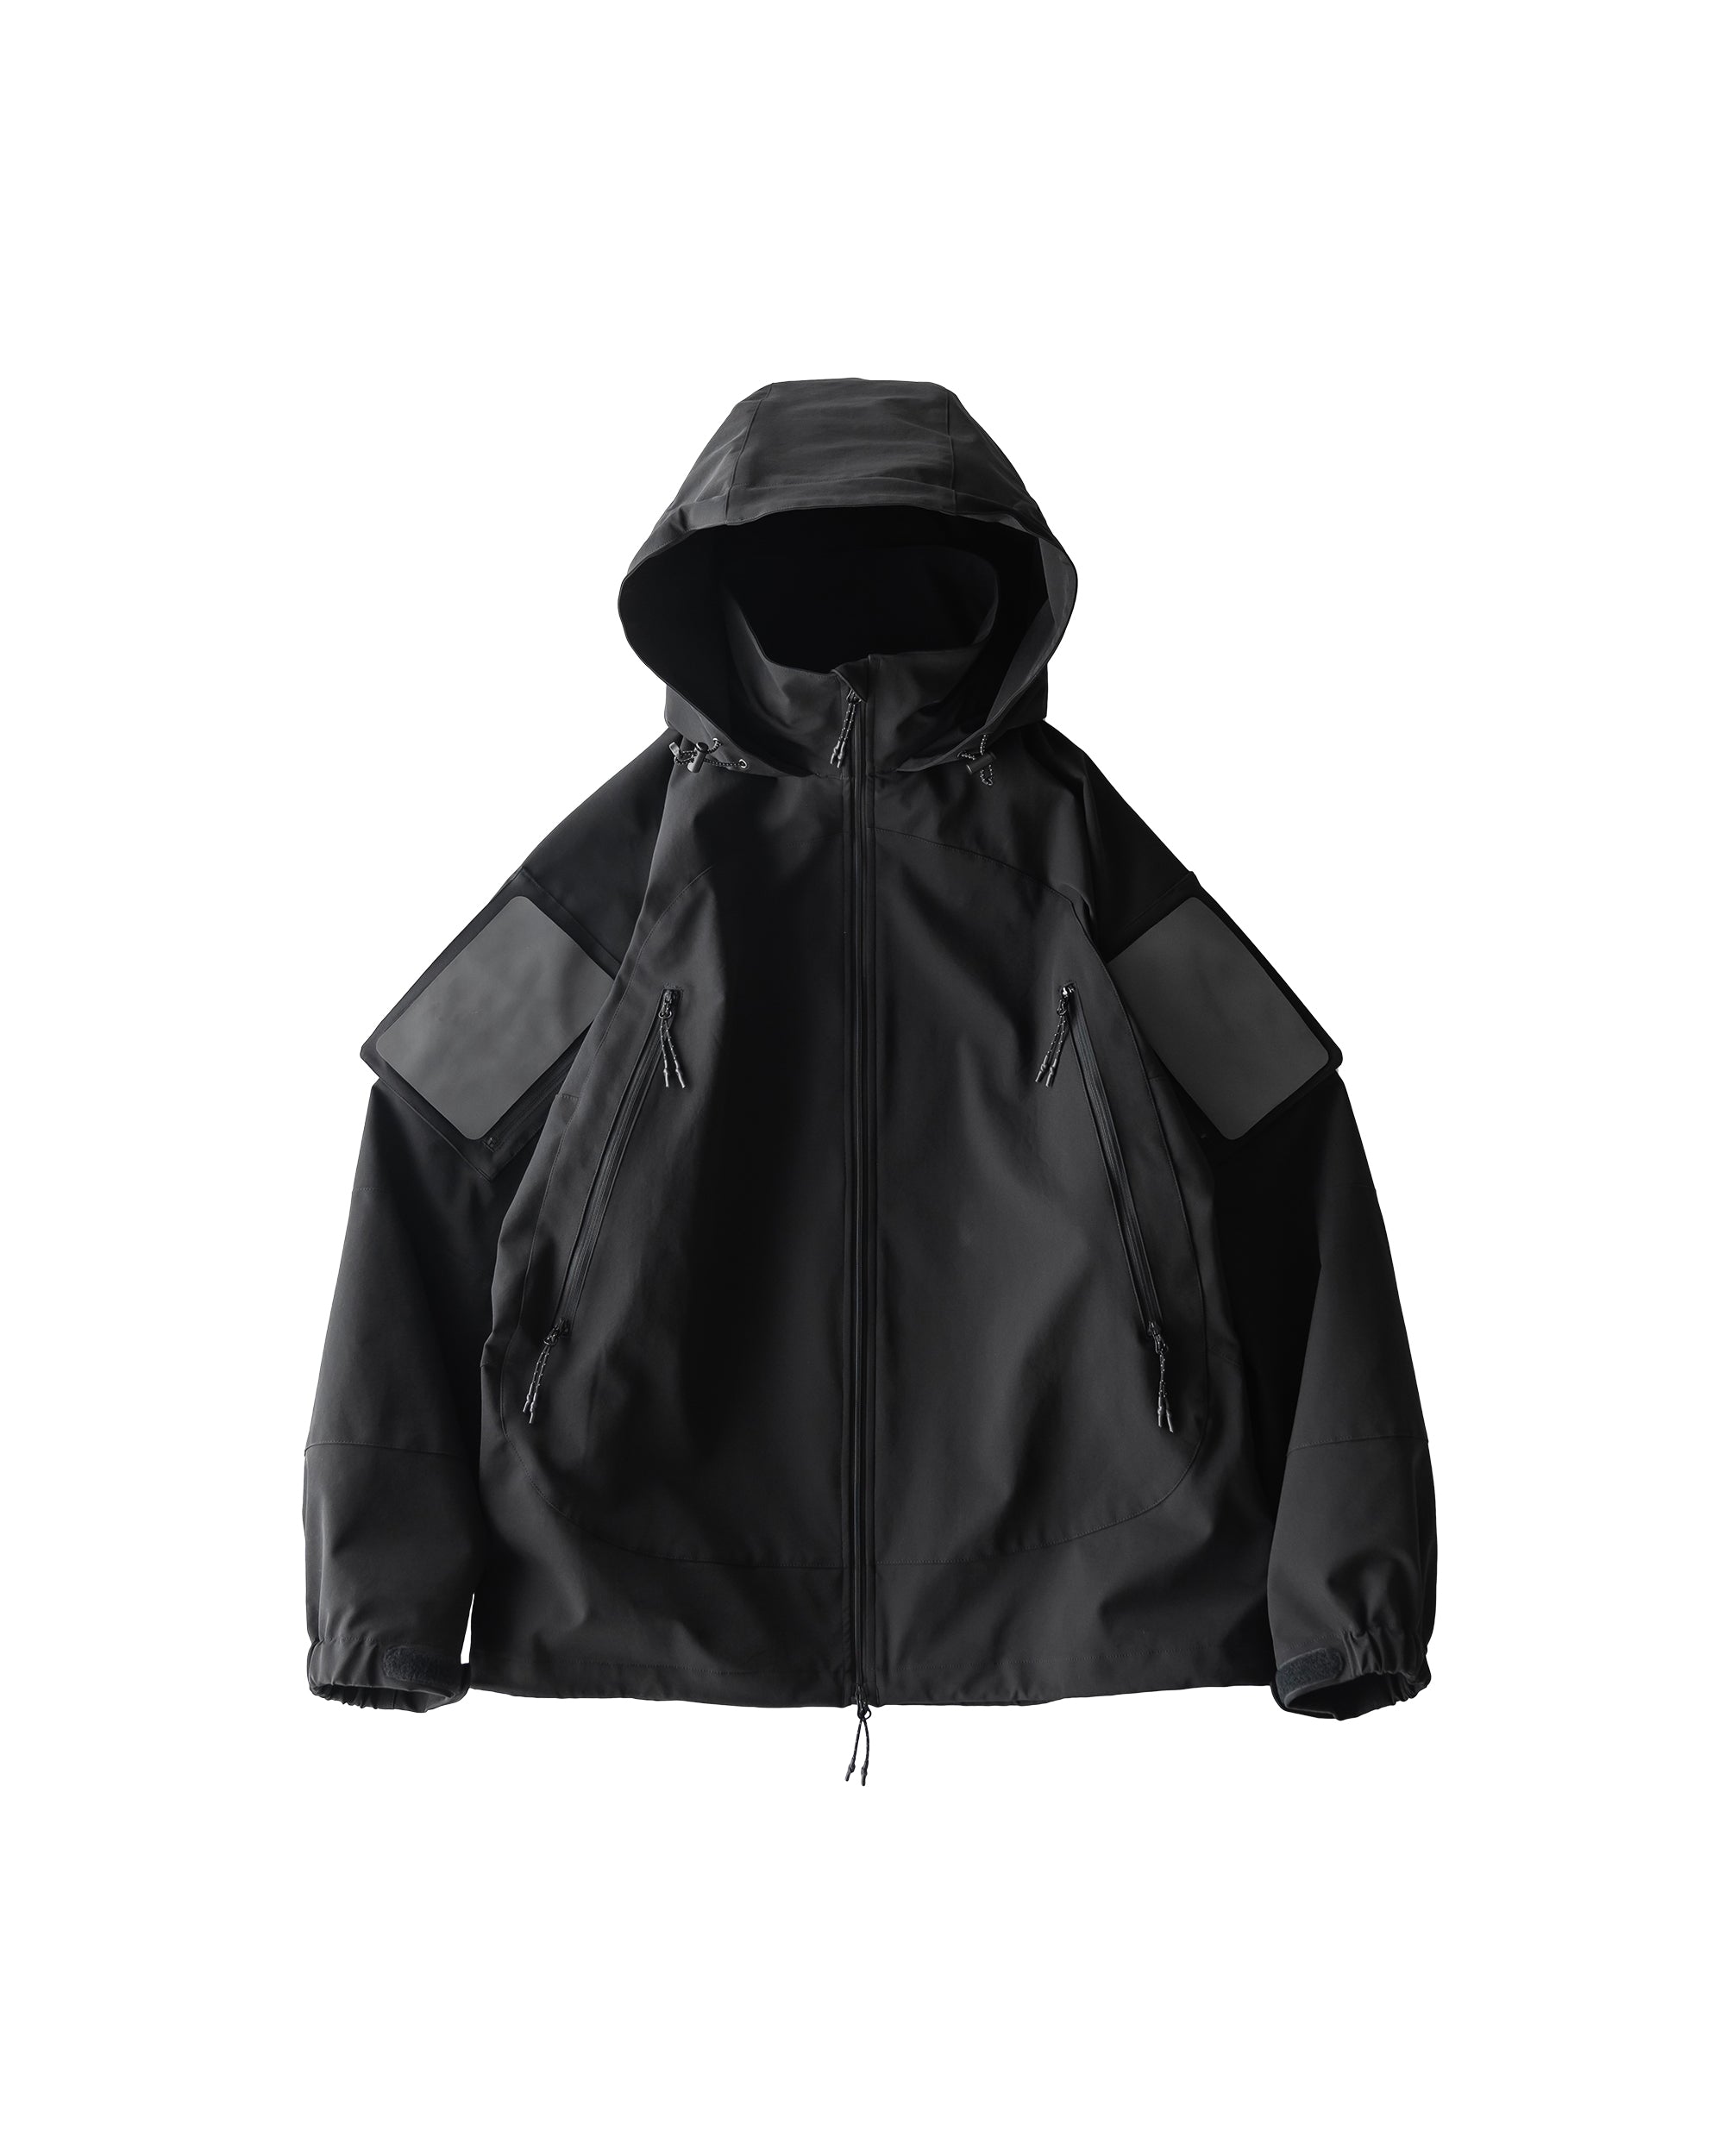 2.10 sat 20:00- In stock】SOFTSHELL MILITARY JACKET